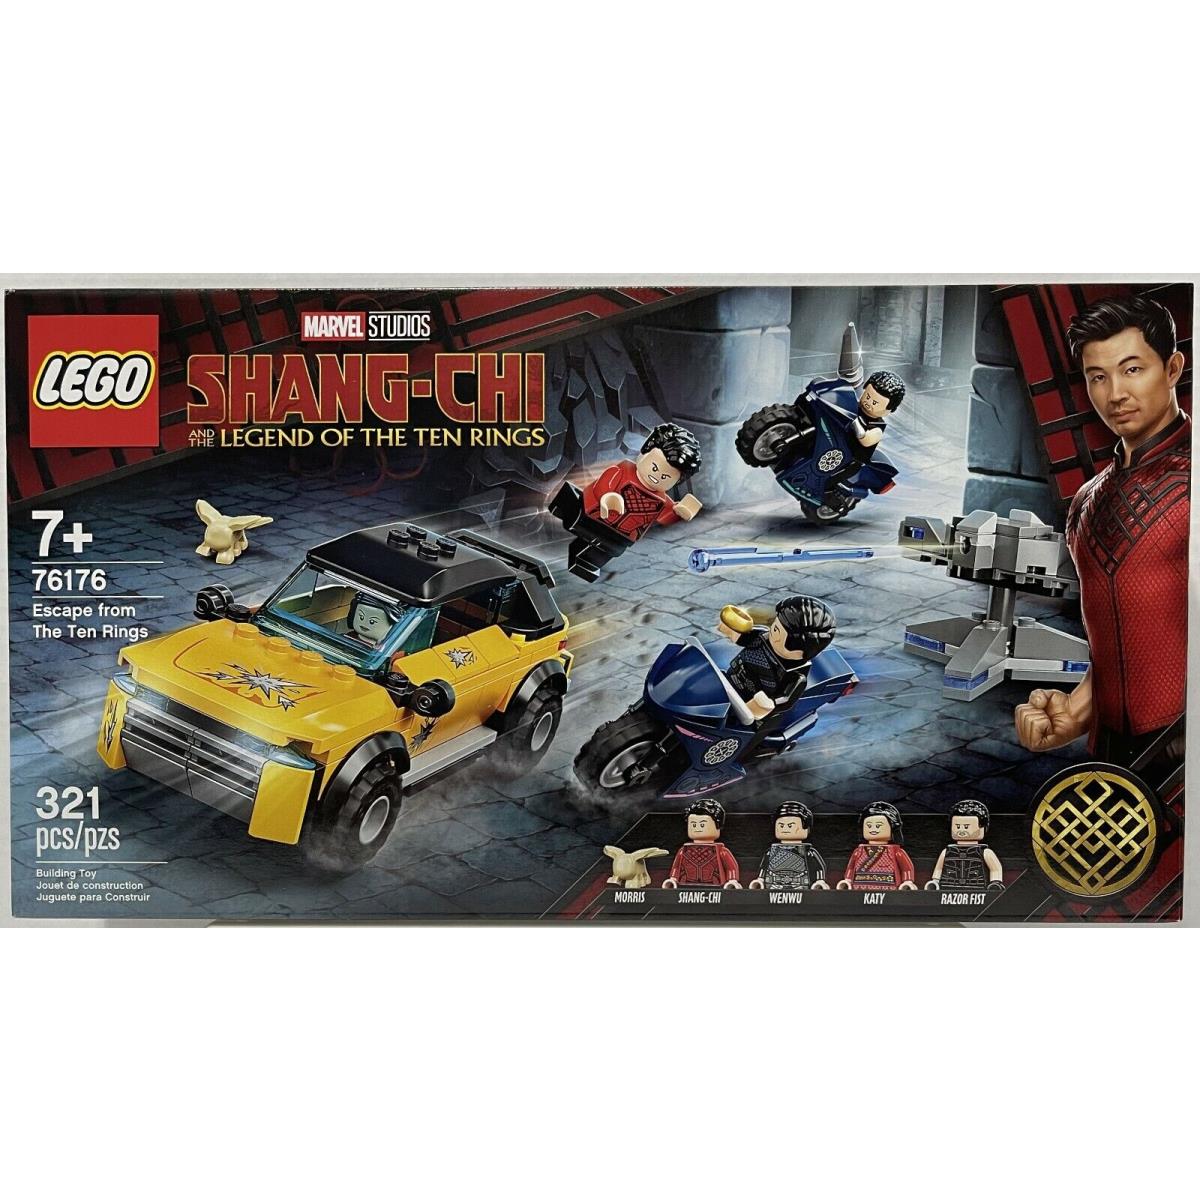 Lego Marvel Shang-chi and The Legend Of The Ten Rings 76176 7+ 321pcs